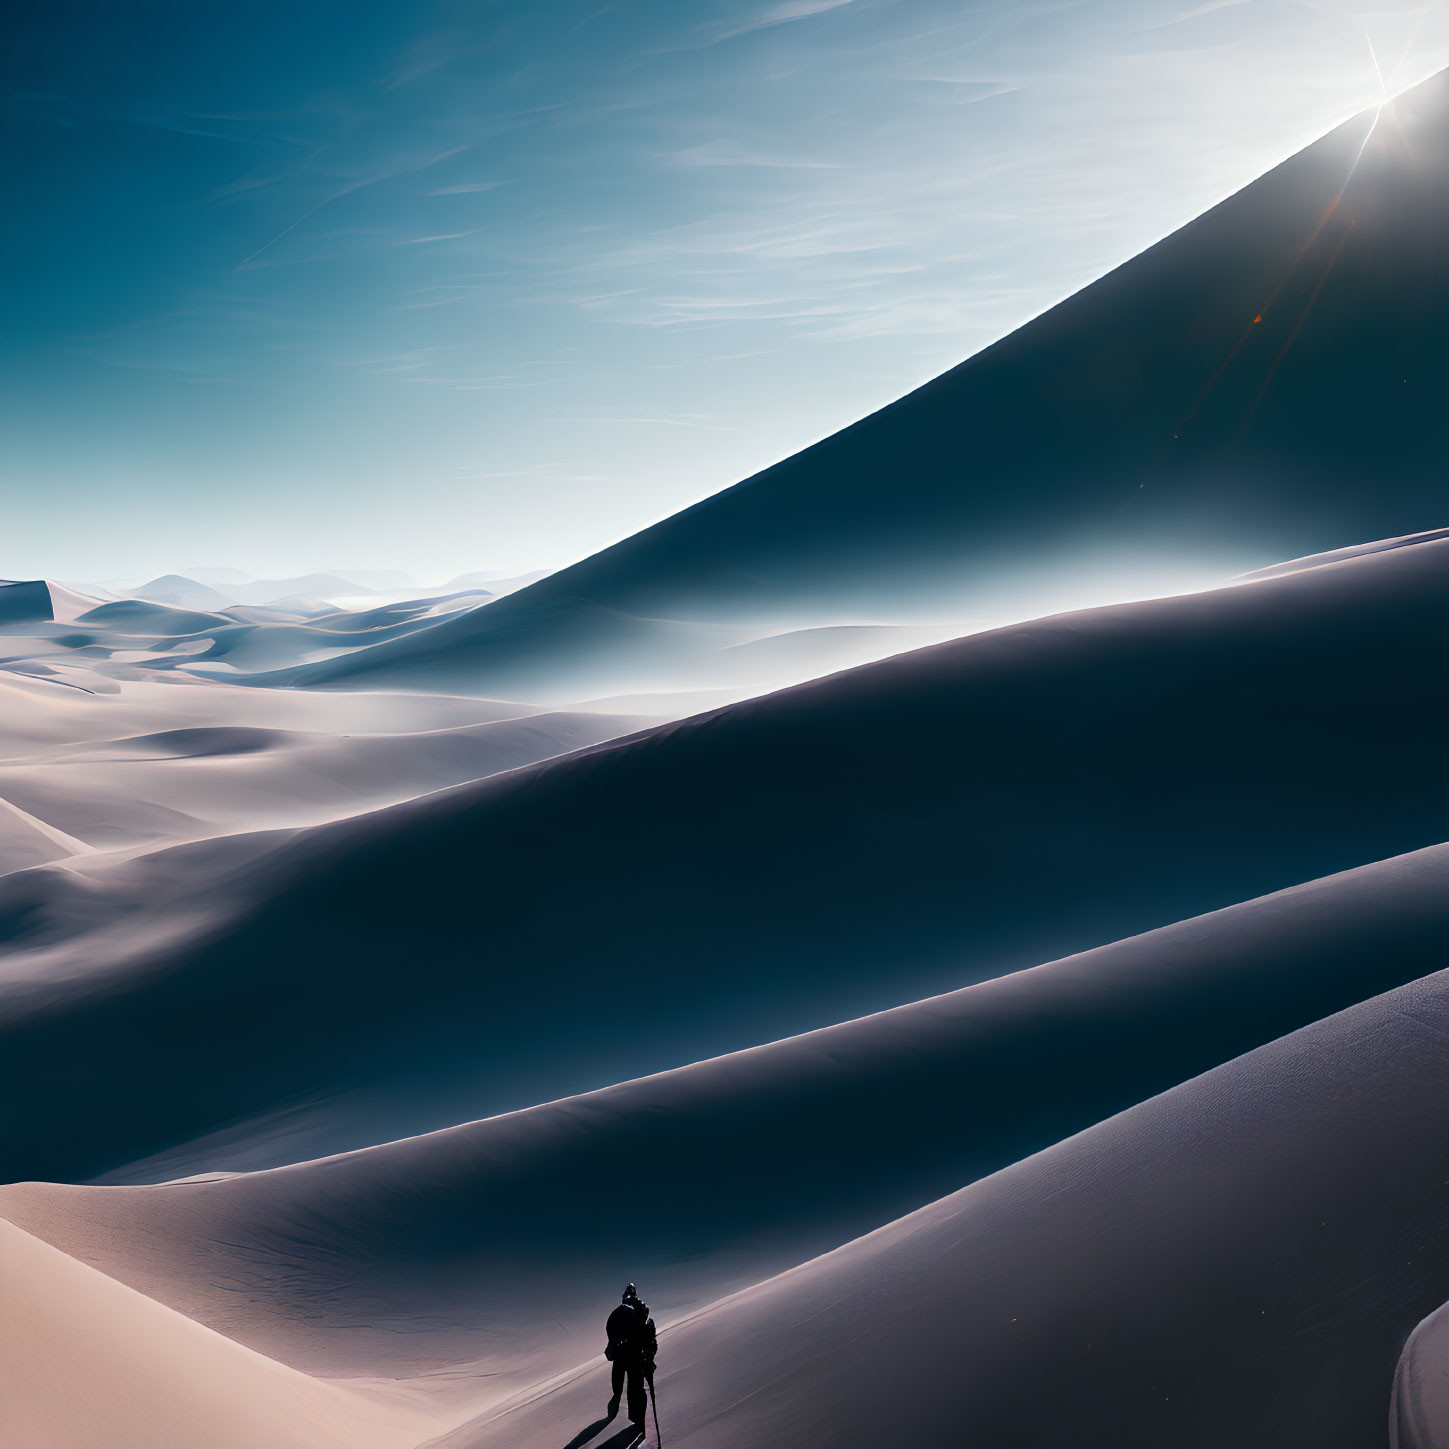 Vast desert landscape with rolling sand dunes and clear sky